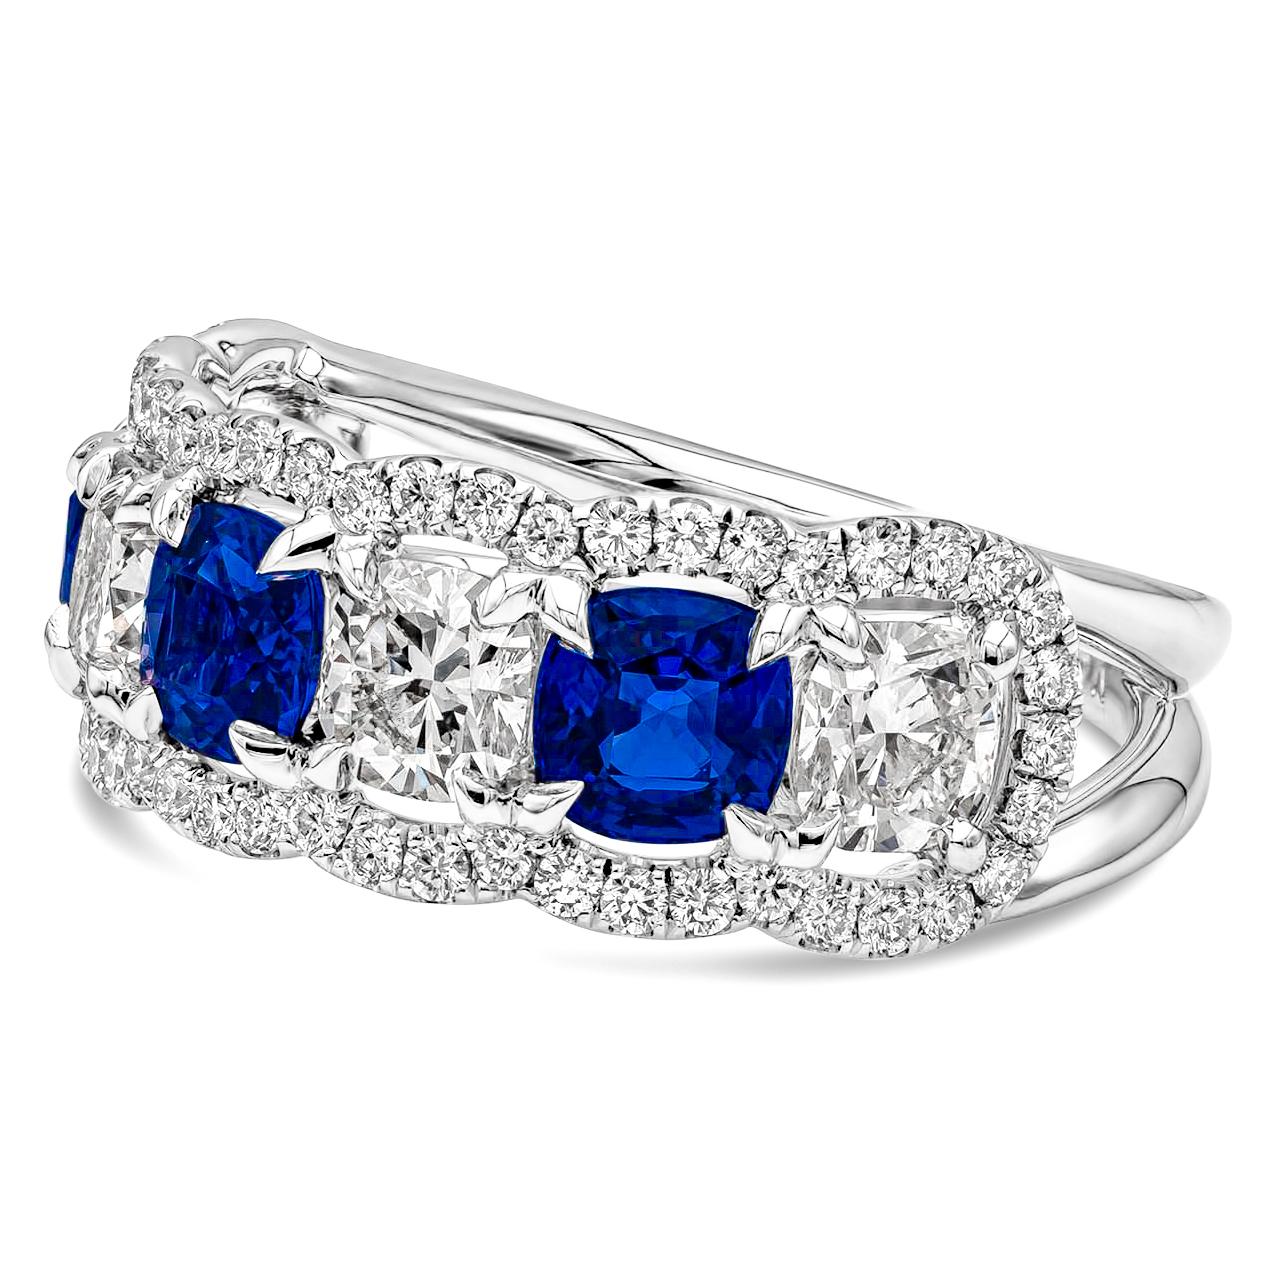 A marvelous seven stone fashion ring showcasing alternating cushion cut diamonds and blue sapphires each set in a claw four prong setting. Diamonds weighs 1.61 carats, GIA Certified E-F Color and VS in Clarity. Blue Sapphires weighs 1.98 carats